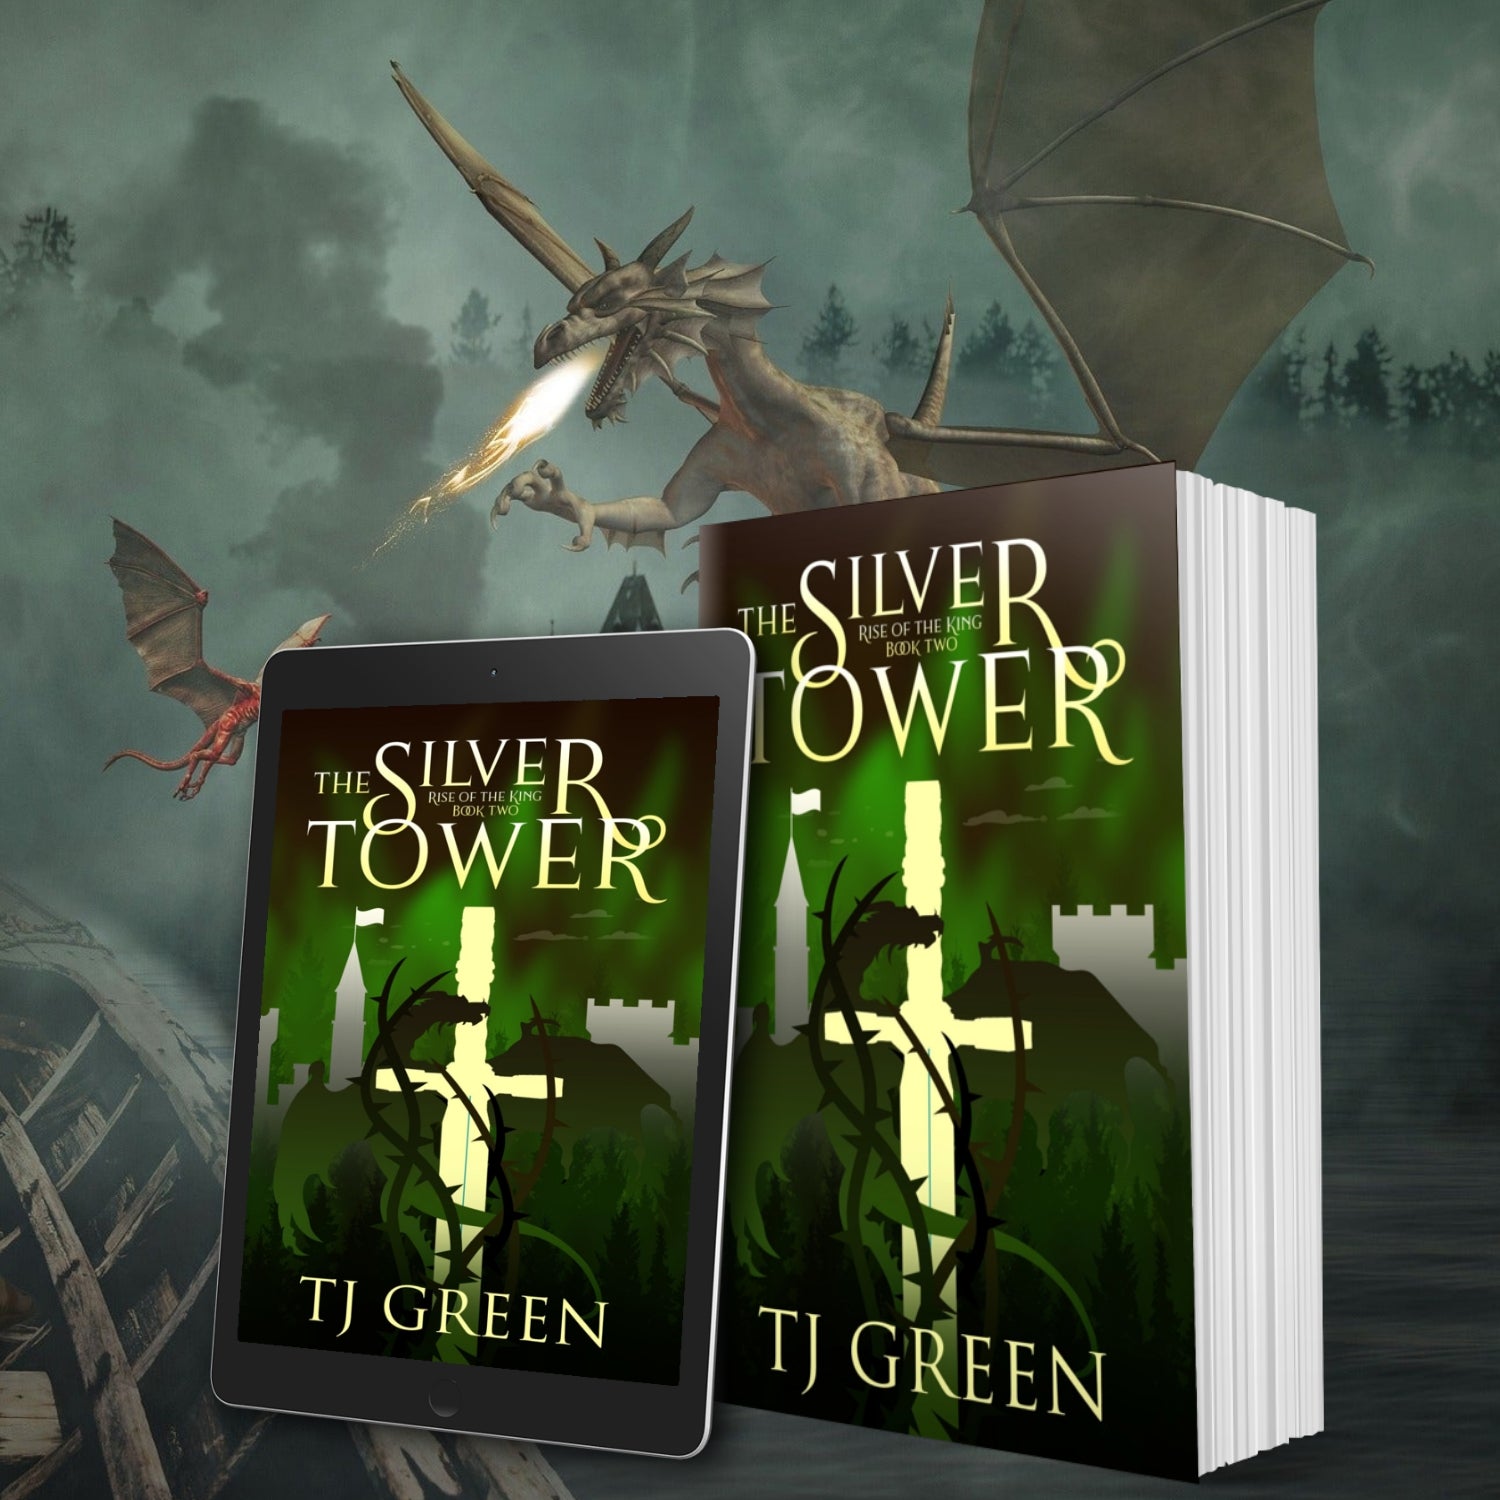 The Silver Tower, Rise of the King #2, Arthurian Fantasy, Magic, dragons, adventure, Merlin.